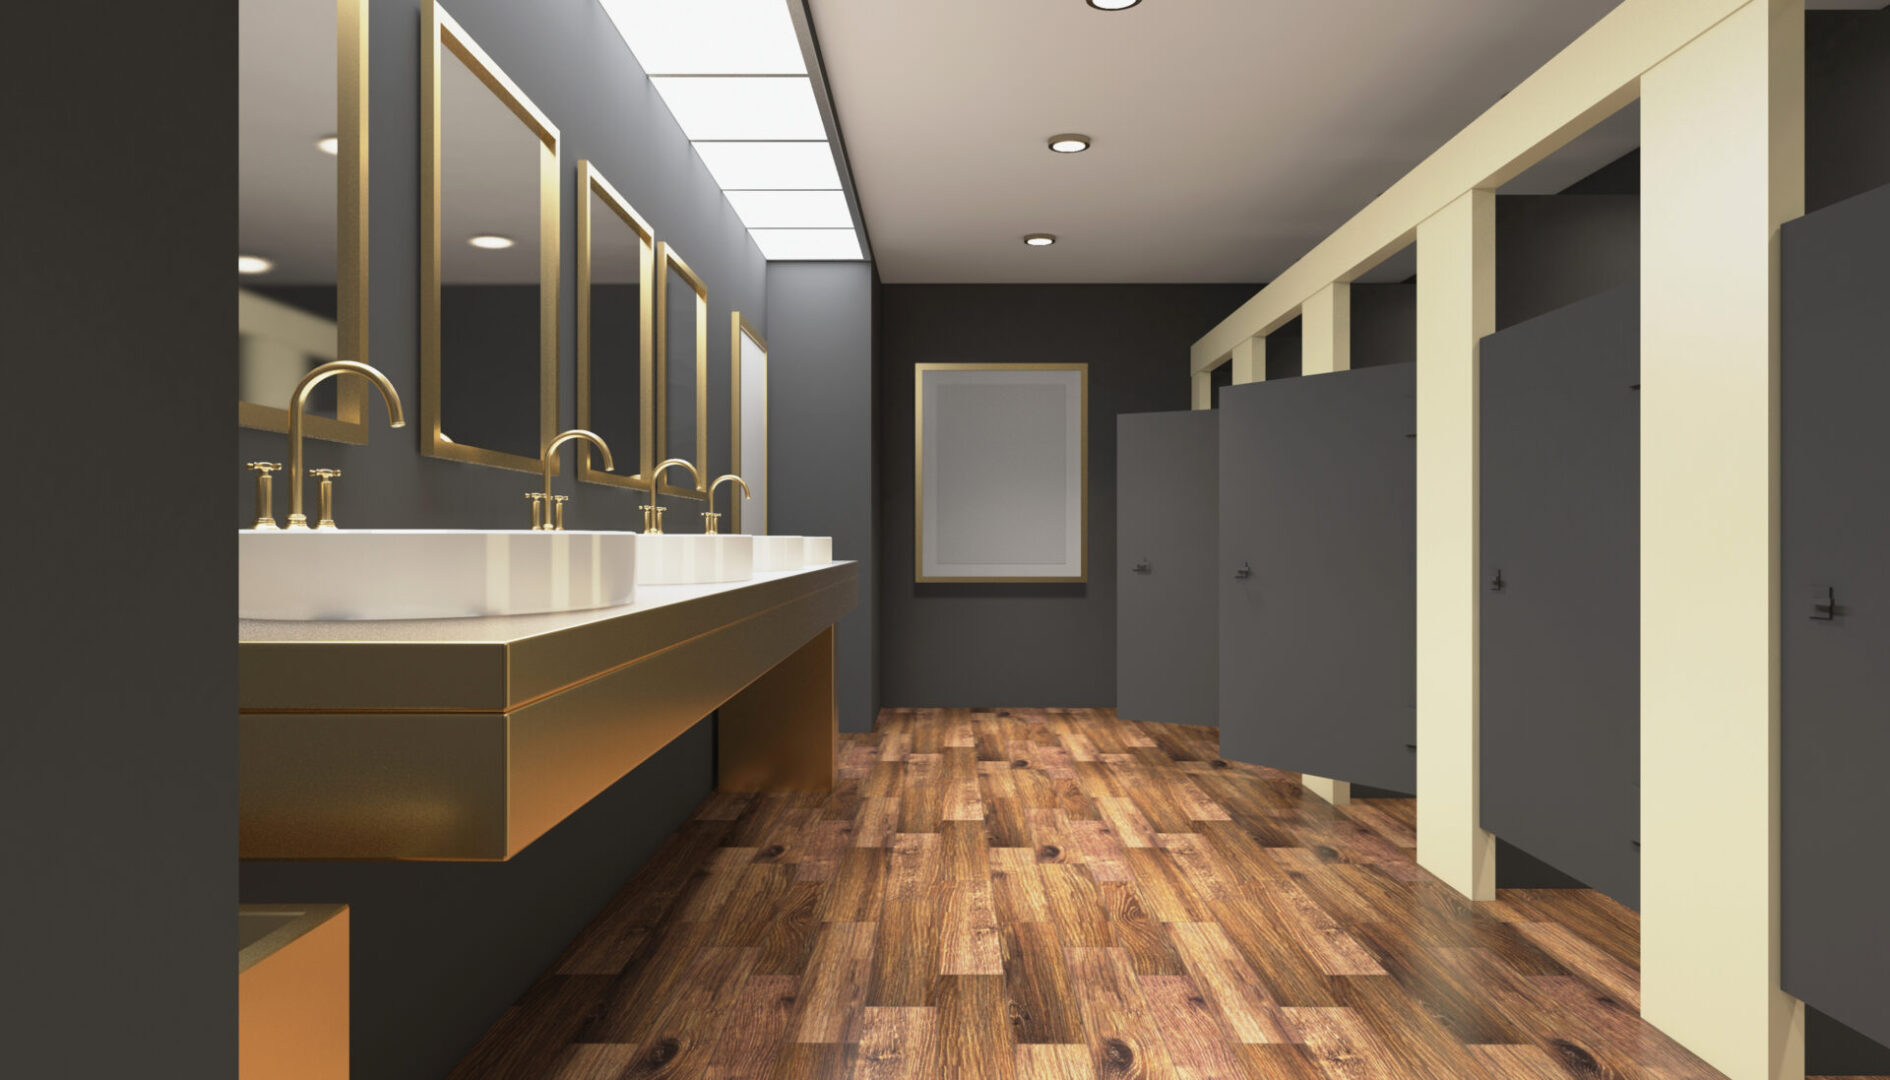 A bathroom with wood floors and mirrors